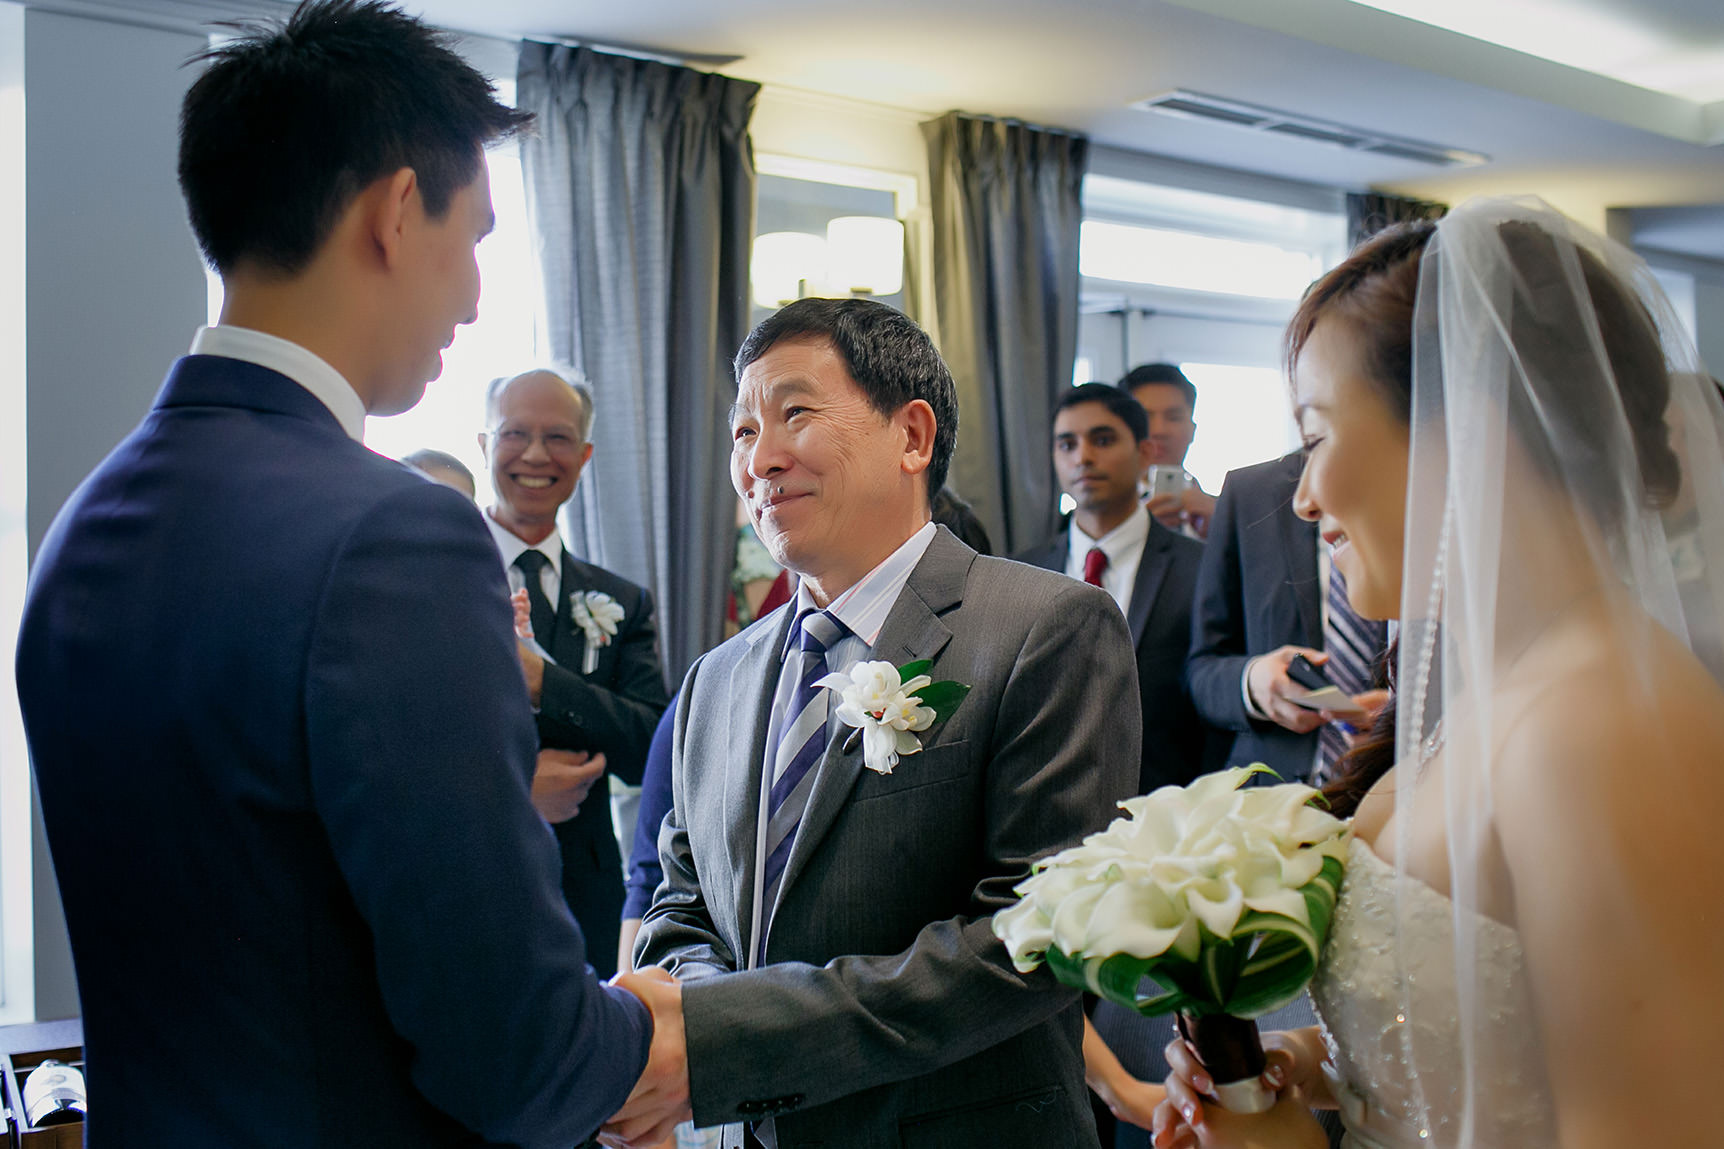 Bride's father shakes the groom's hands